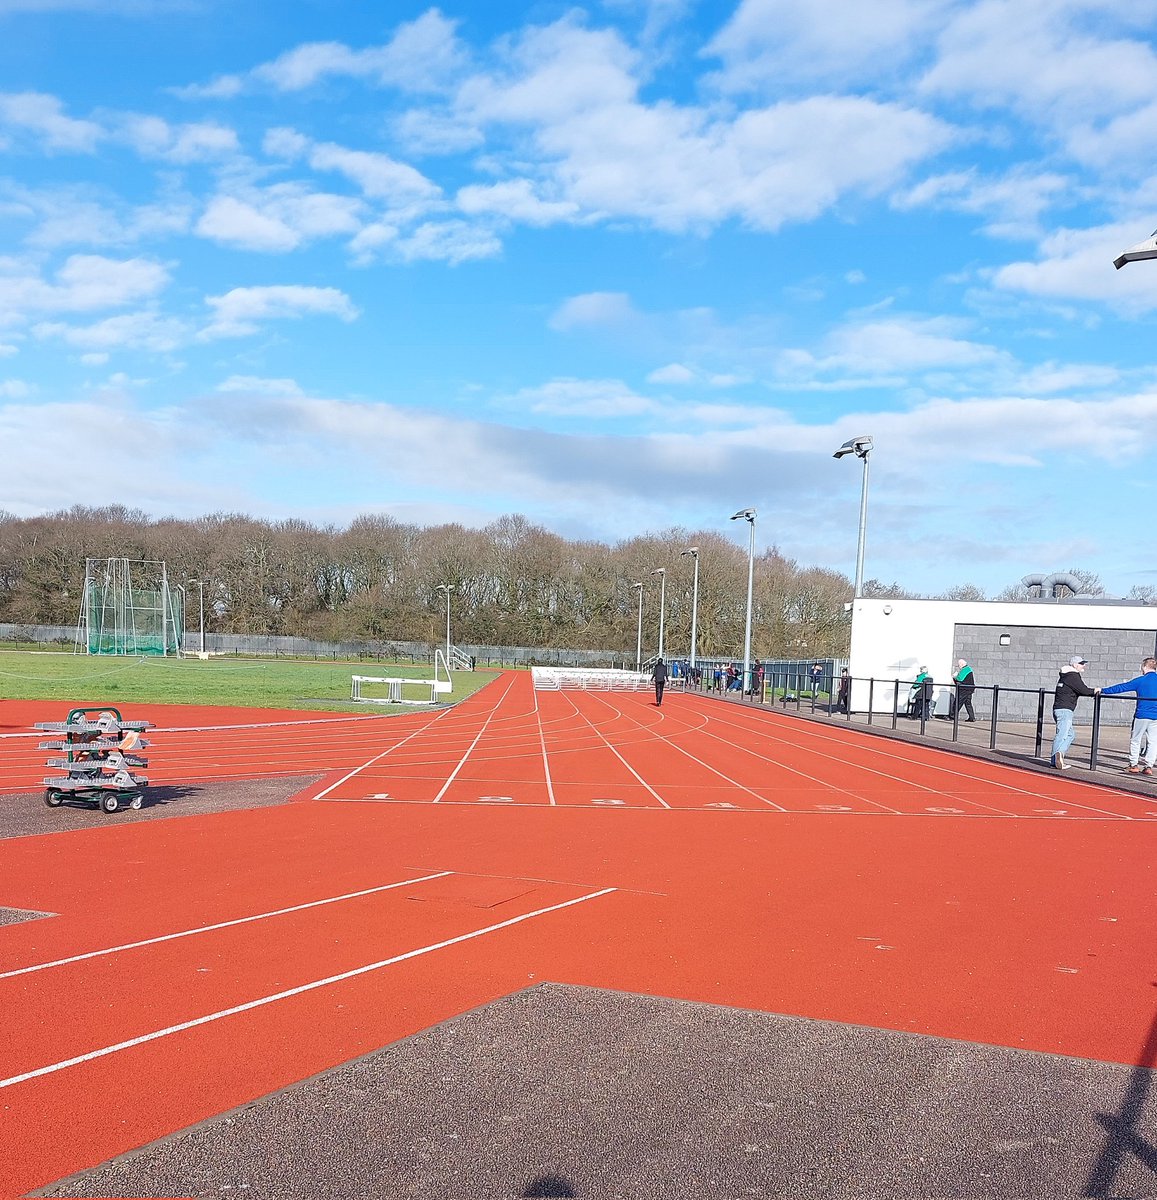 The stage is set for today's meeting. A lovely warm mor ing to open up the season 🏃‍♂️🏅 #AnniversaryOpen #Athletics